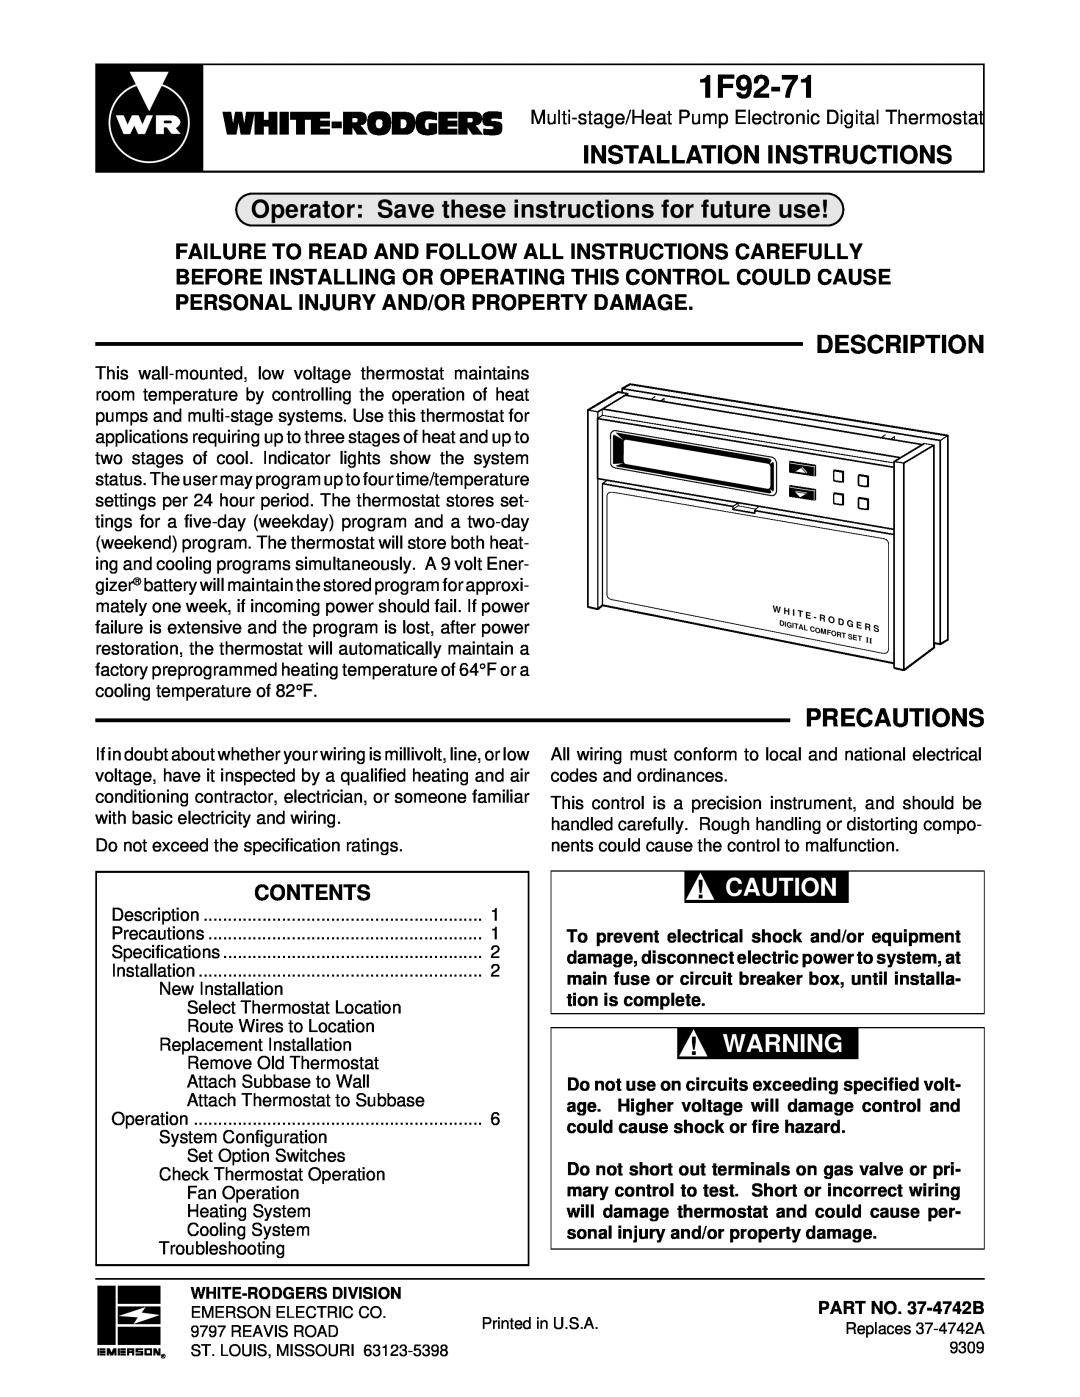 White Rodgers 1F92-71 installation instructions Installation Instructions, Operator Save these instructions for future use 